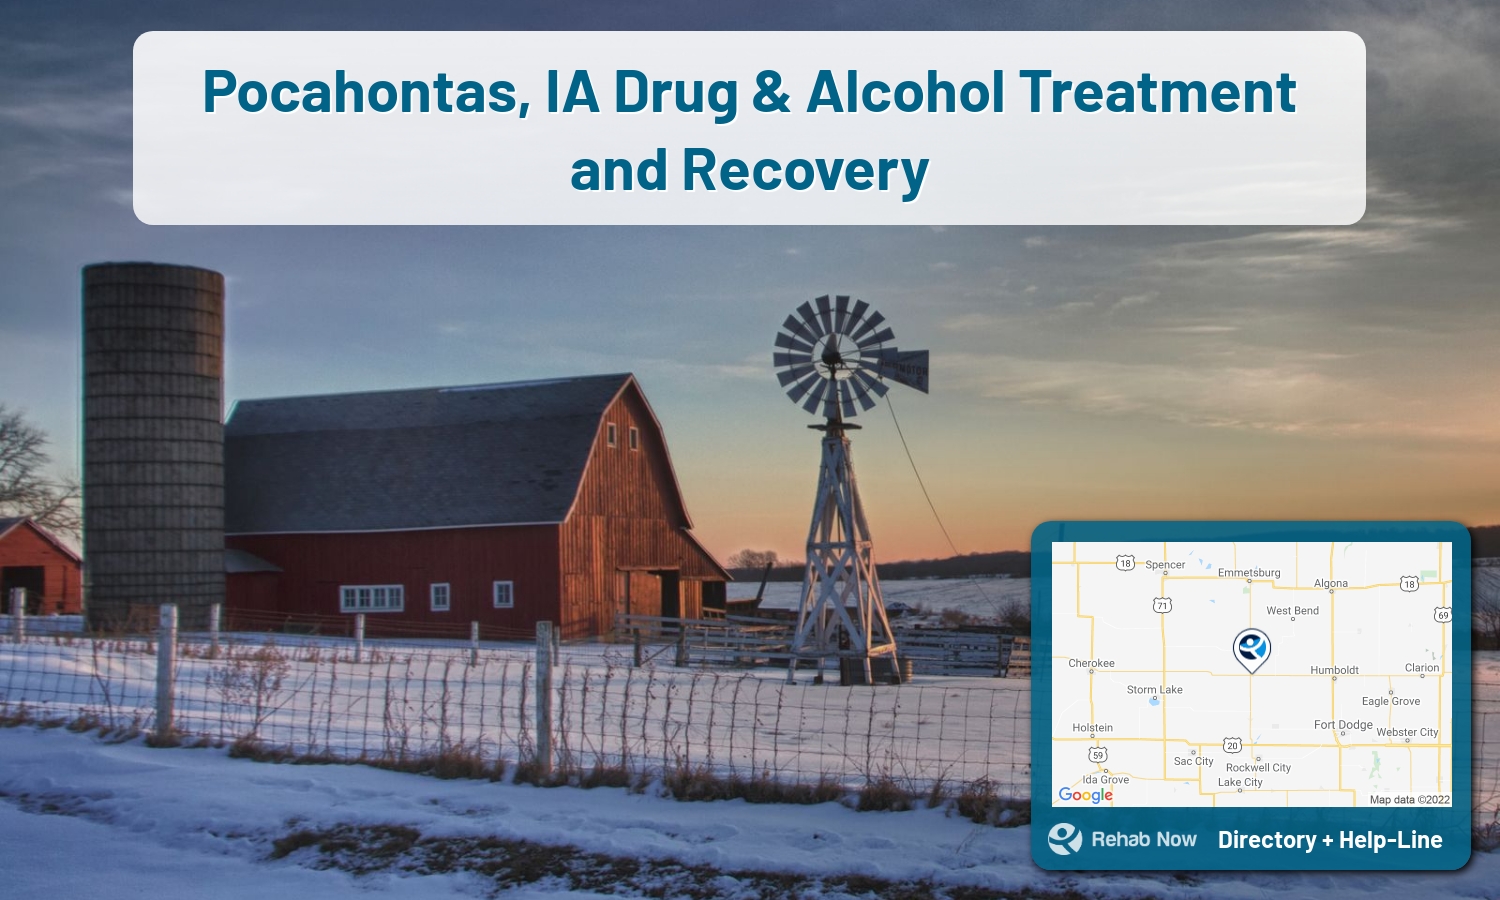 Pocahontas, IA Treatment Centers. Find drug rehab in Pocahontas, Iowa, or detox and treatment programs. Get the right help now!